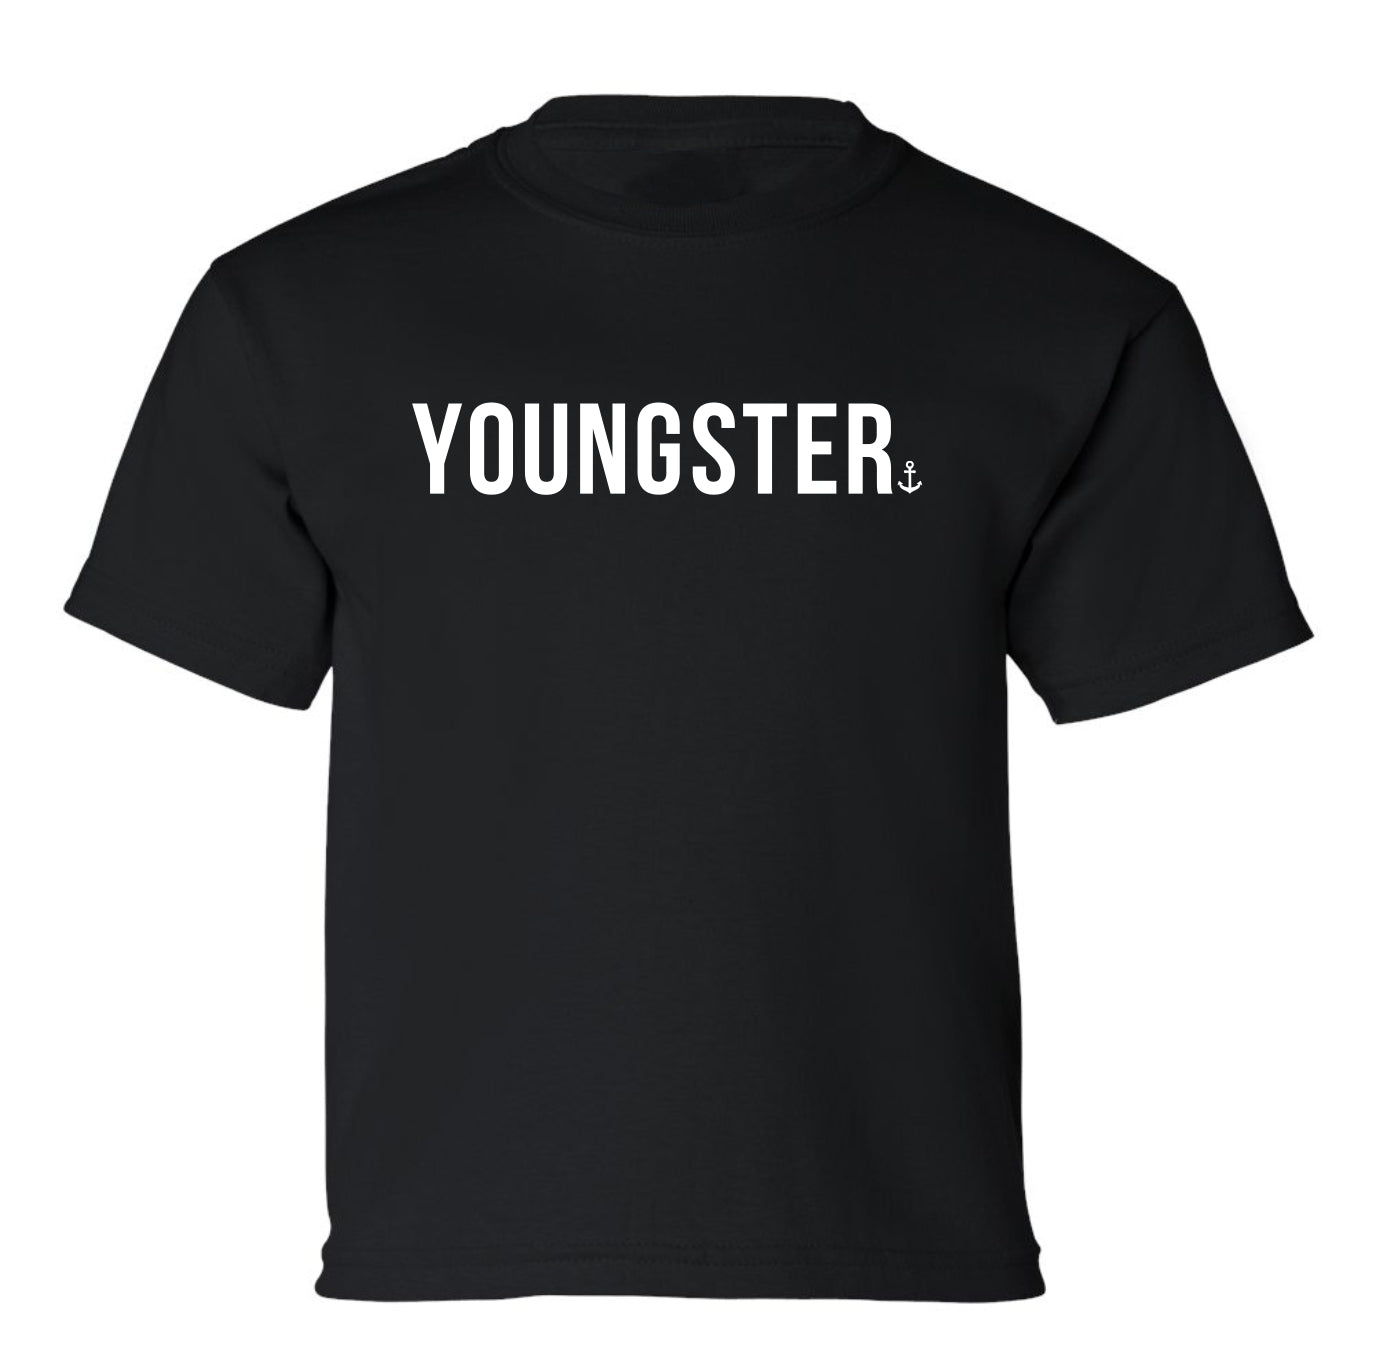 "Youngster" Toddler/Youth T-Shirt